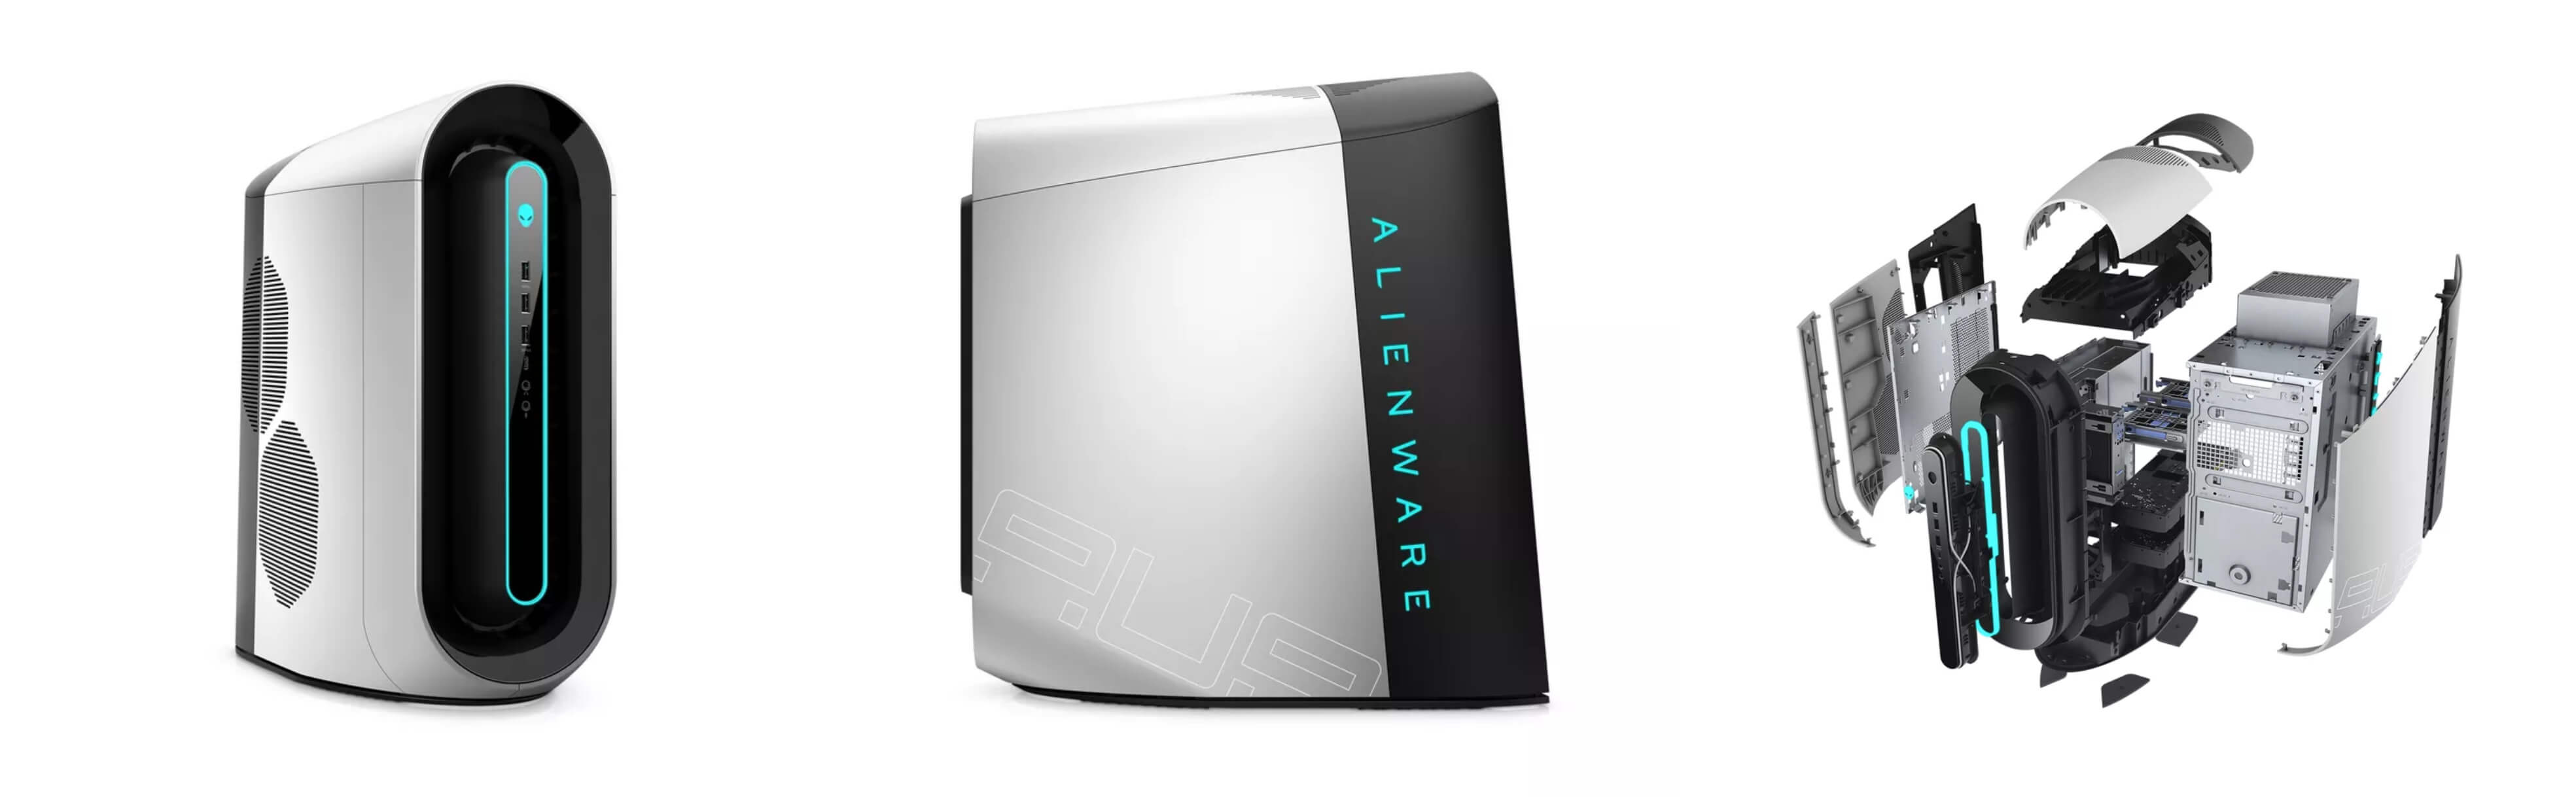 Alienware refreshes the Aurora R9 gaming PC and other hardware with its Legend design aesthetic